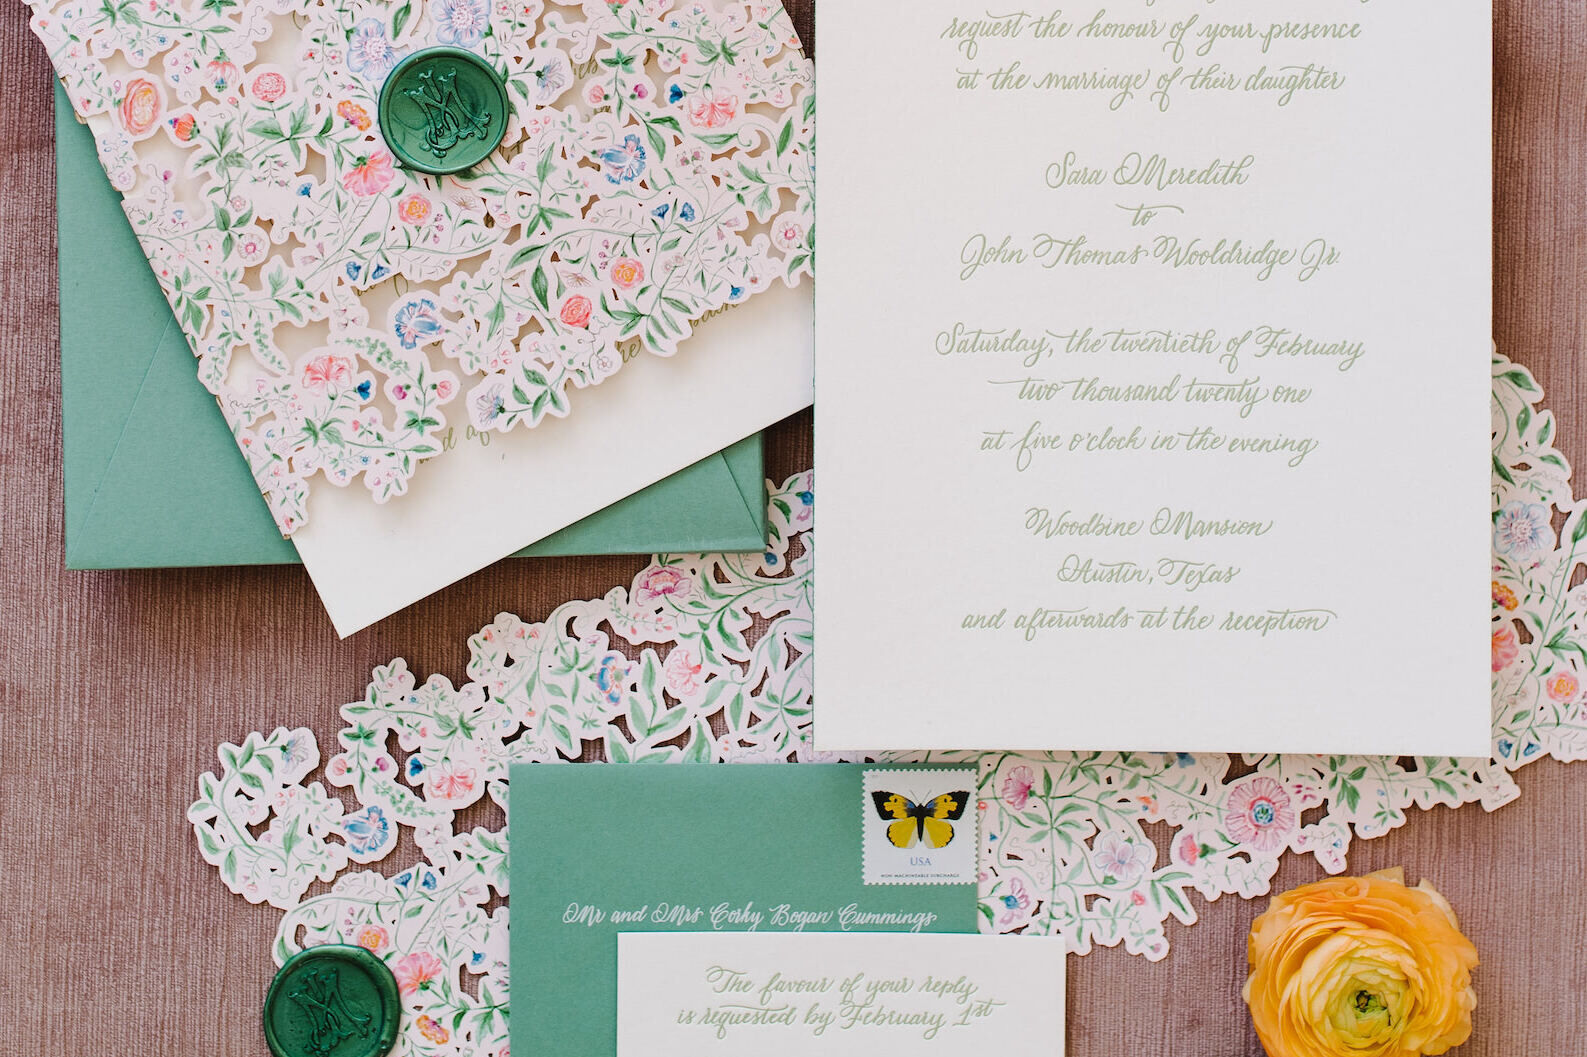 A wedding invitation suite with calligraphy and floral illustrations, and its soft green envelope ready to be sent using assorted vintage postage stamps.